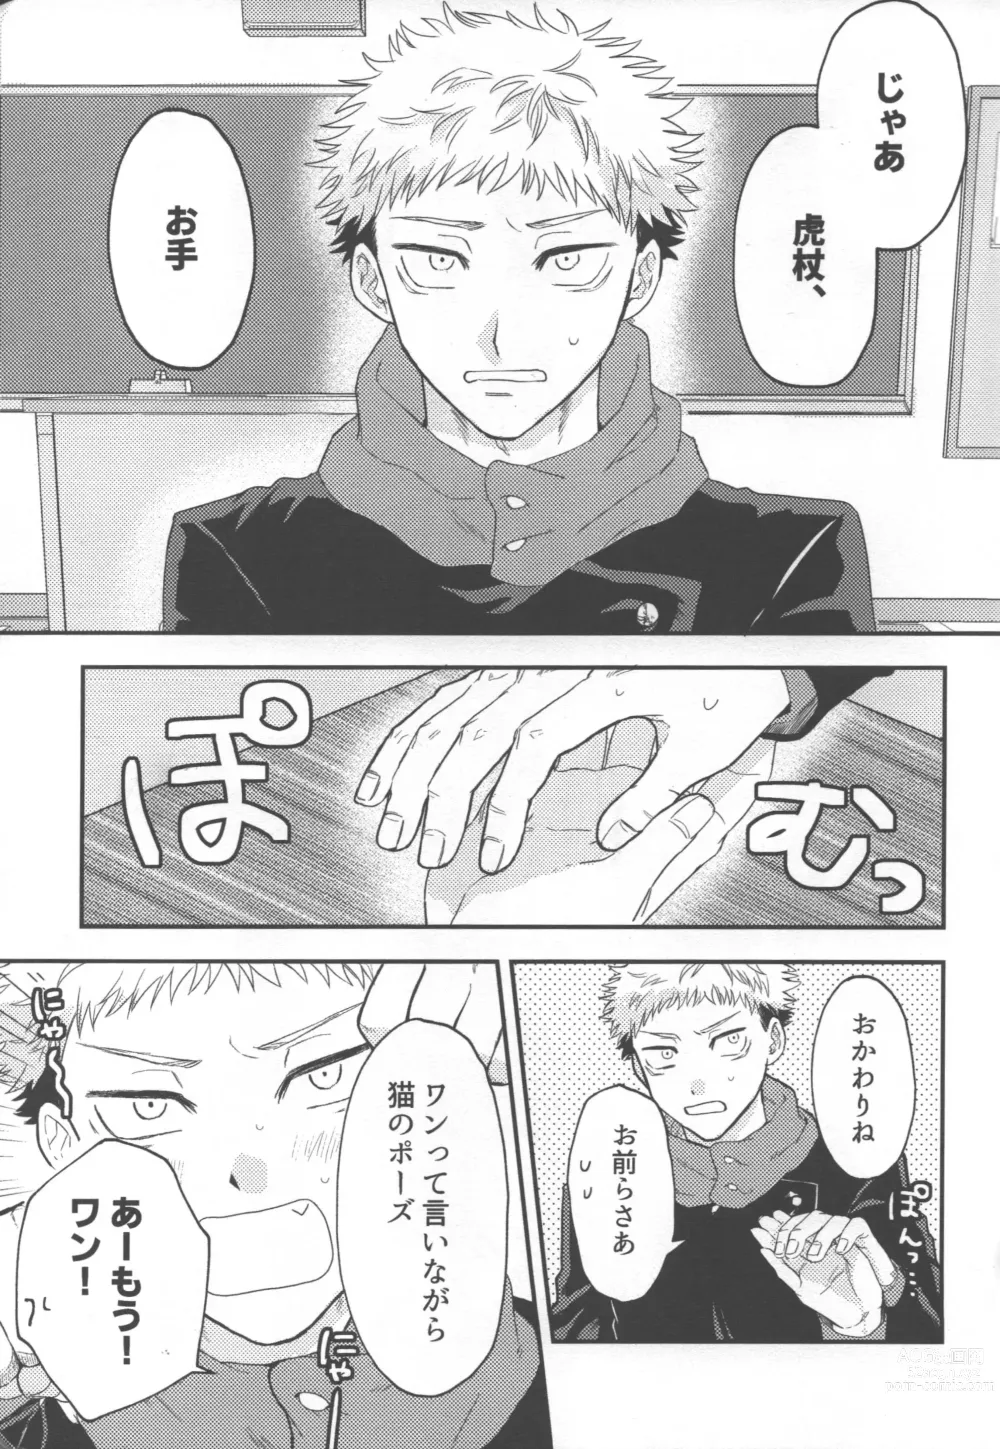 Page 2 of doujinshi Dont Look at ME Like That.